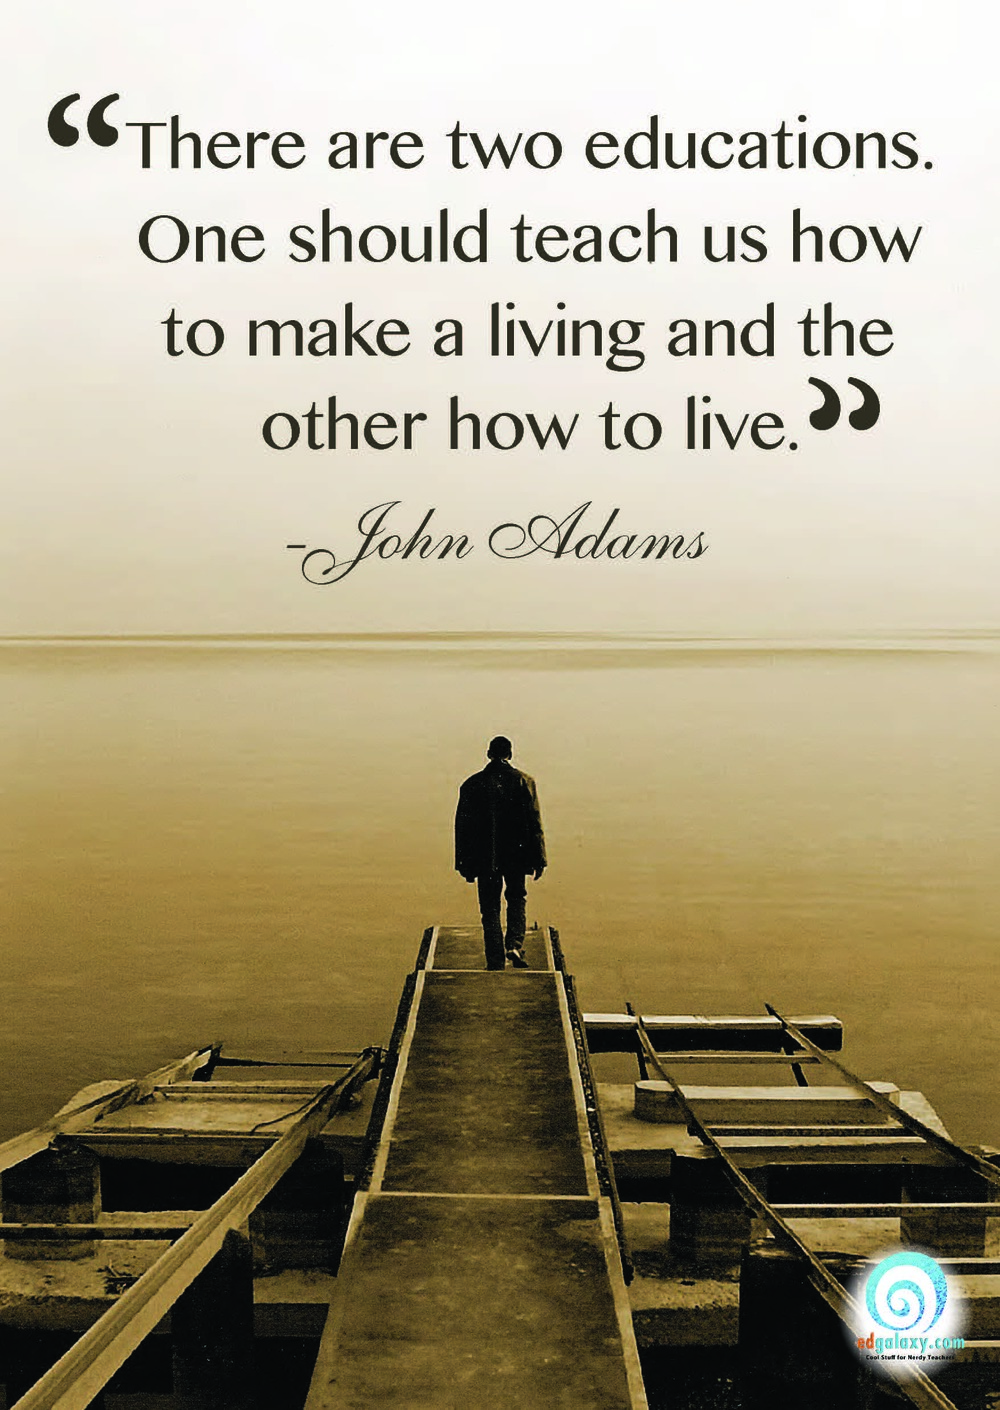 There are two educations. One should teach us how to make a living and the other how to live. John Adams